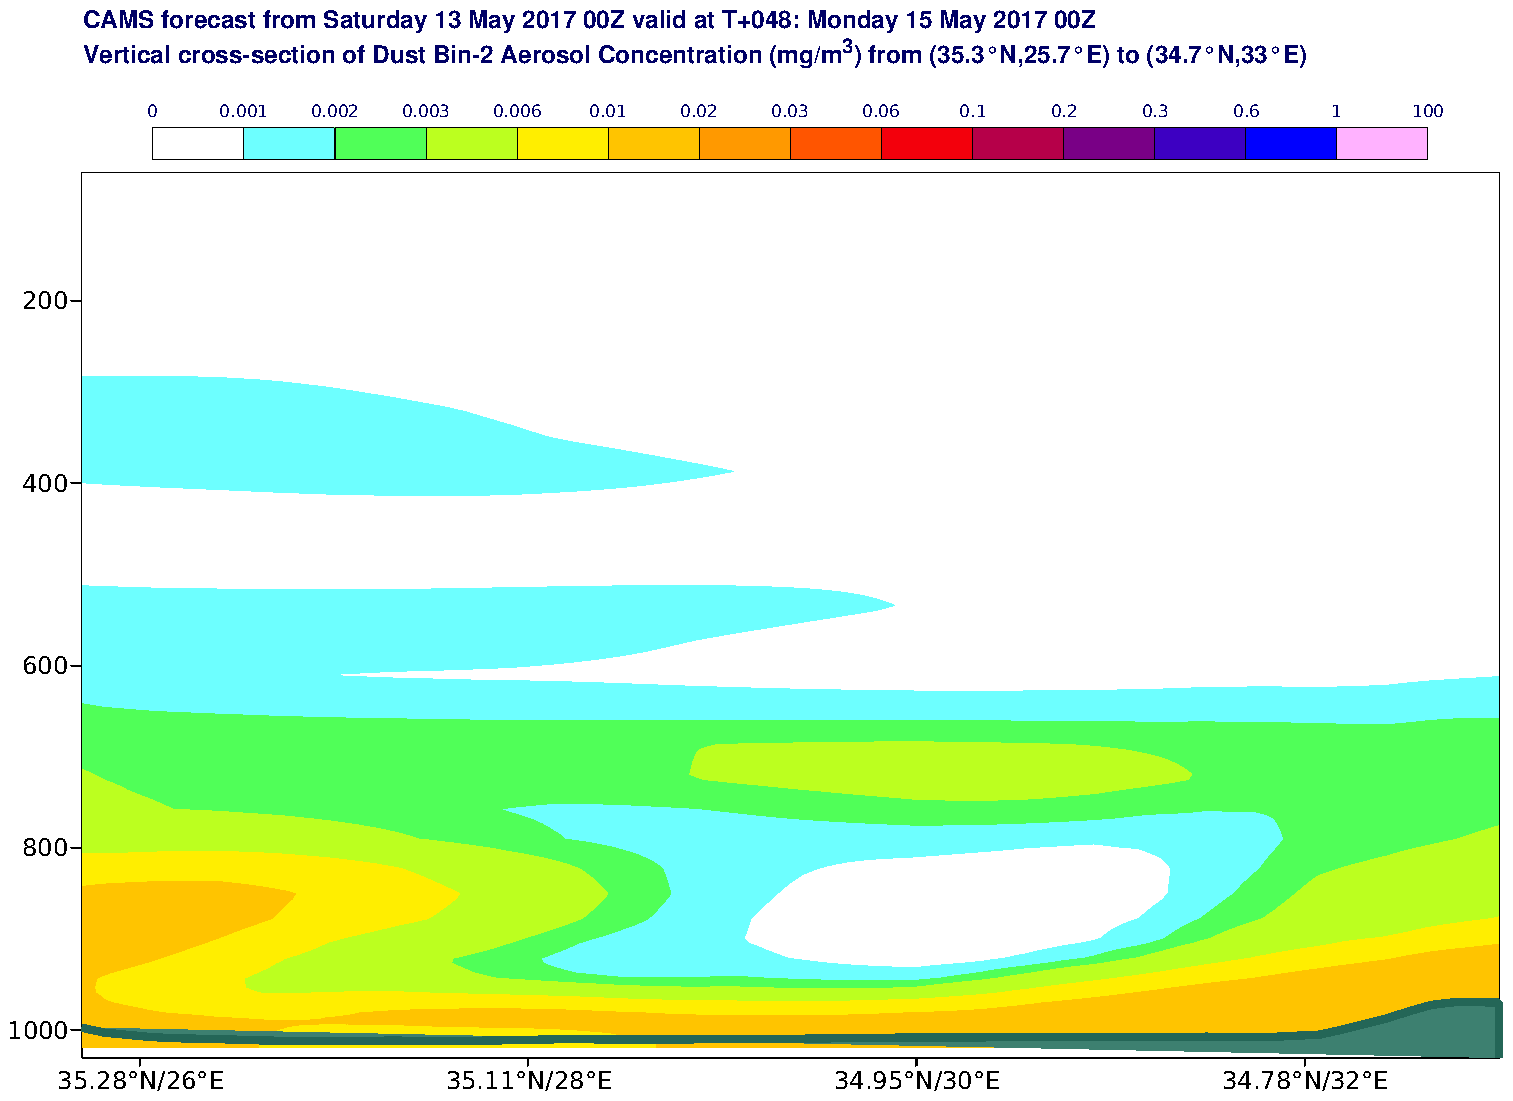 Vertical cross-section of Dust Bin-2 Aerosol Concentration (mg/m3) valid at T48 - 2017-05-15 00:00